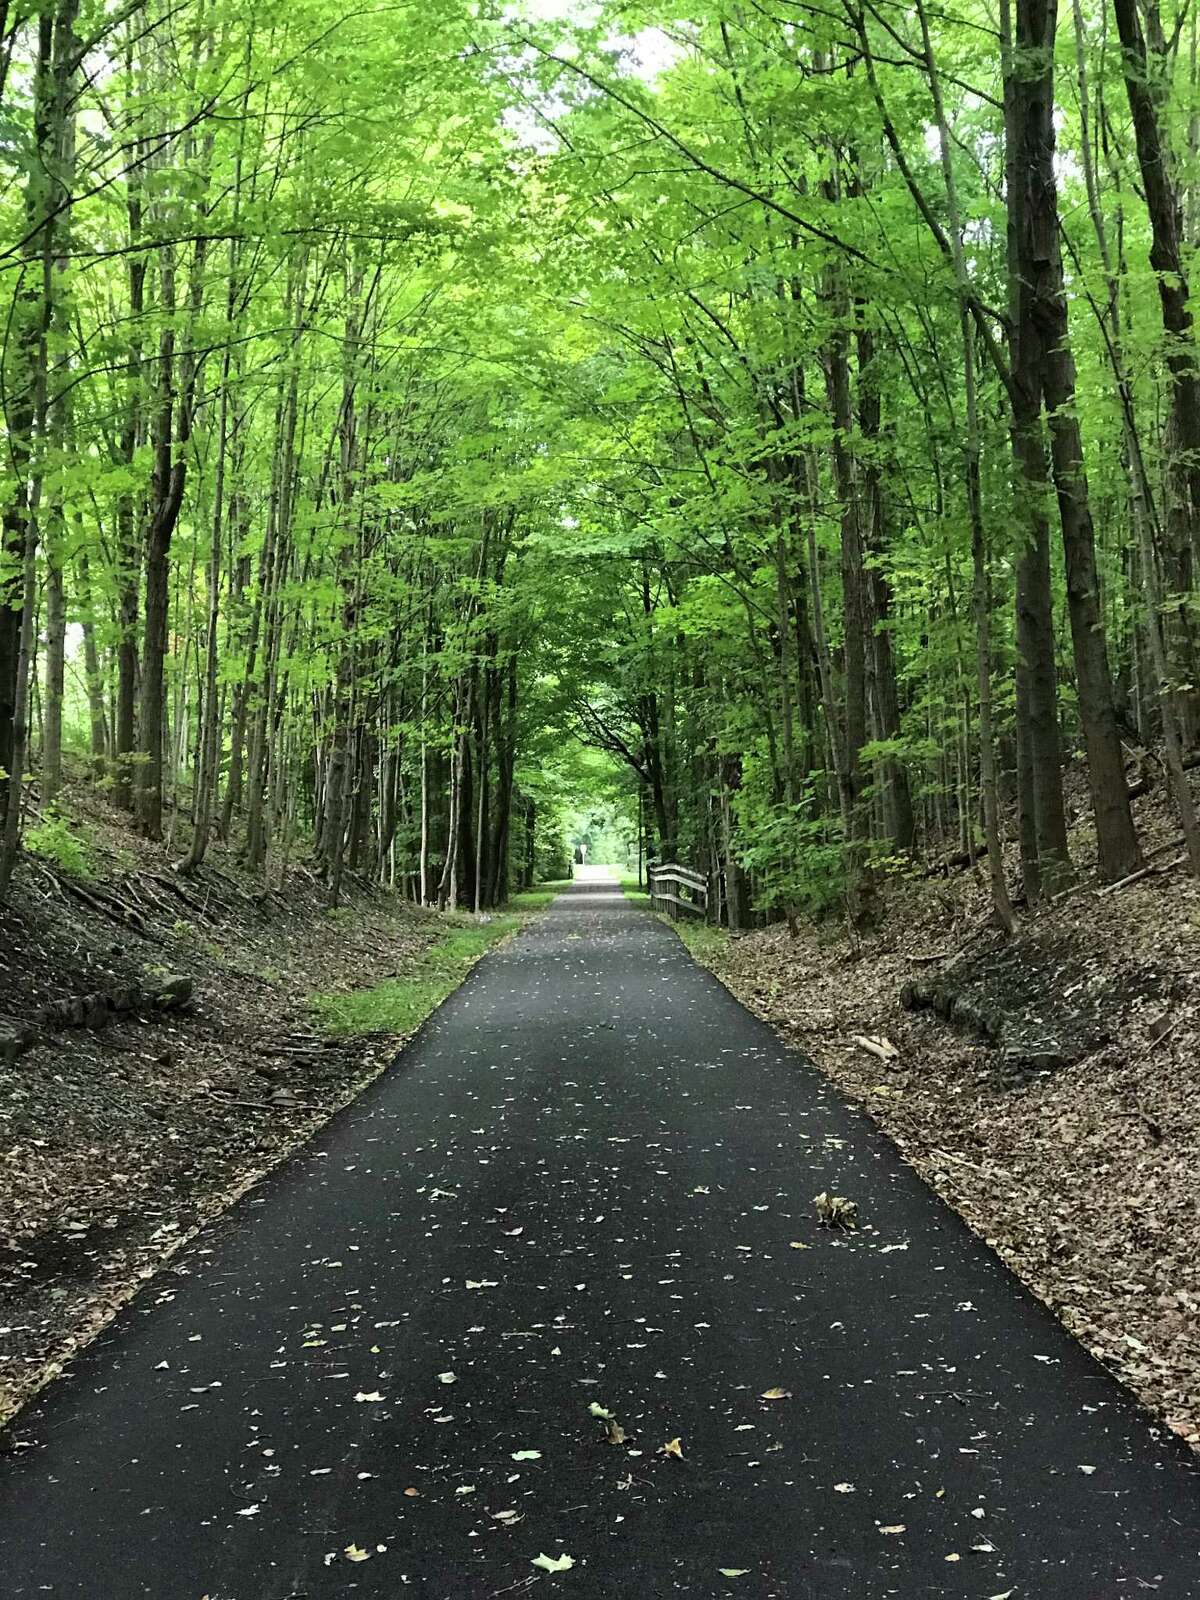 This was the view on the bike path one beautiful September day heading toward Cohoes from the town of Colonie park. Very peaceful, says Khalan O'Brien of Cohoes.